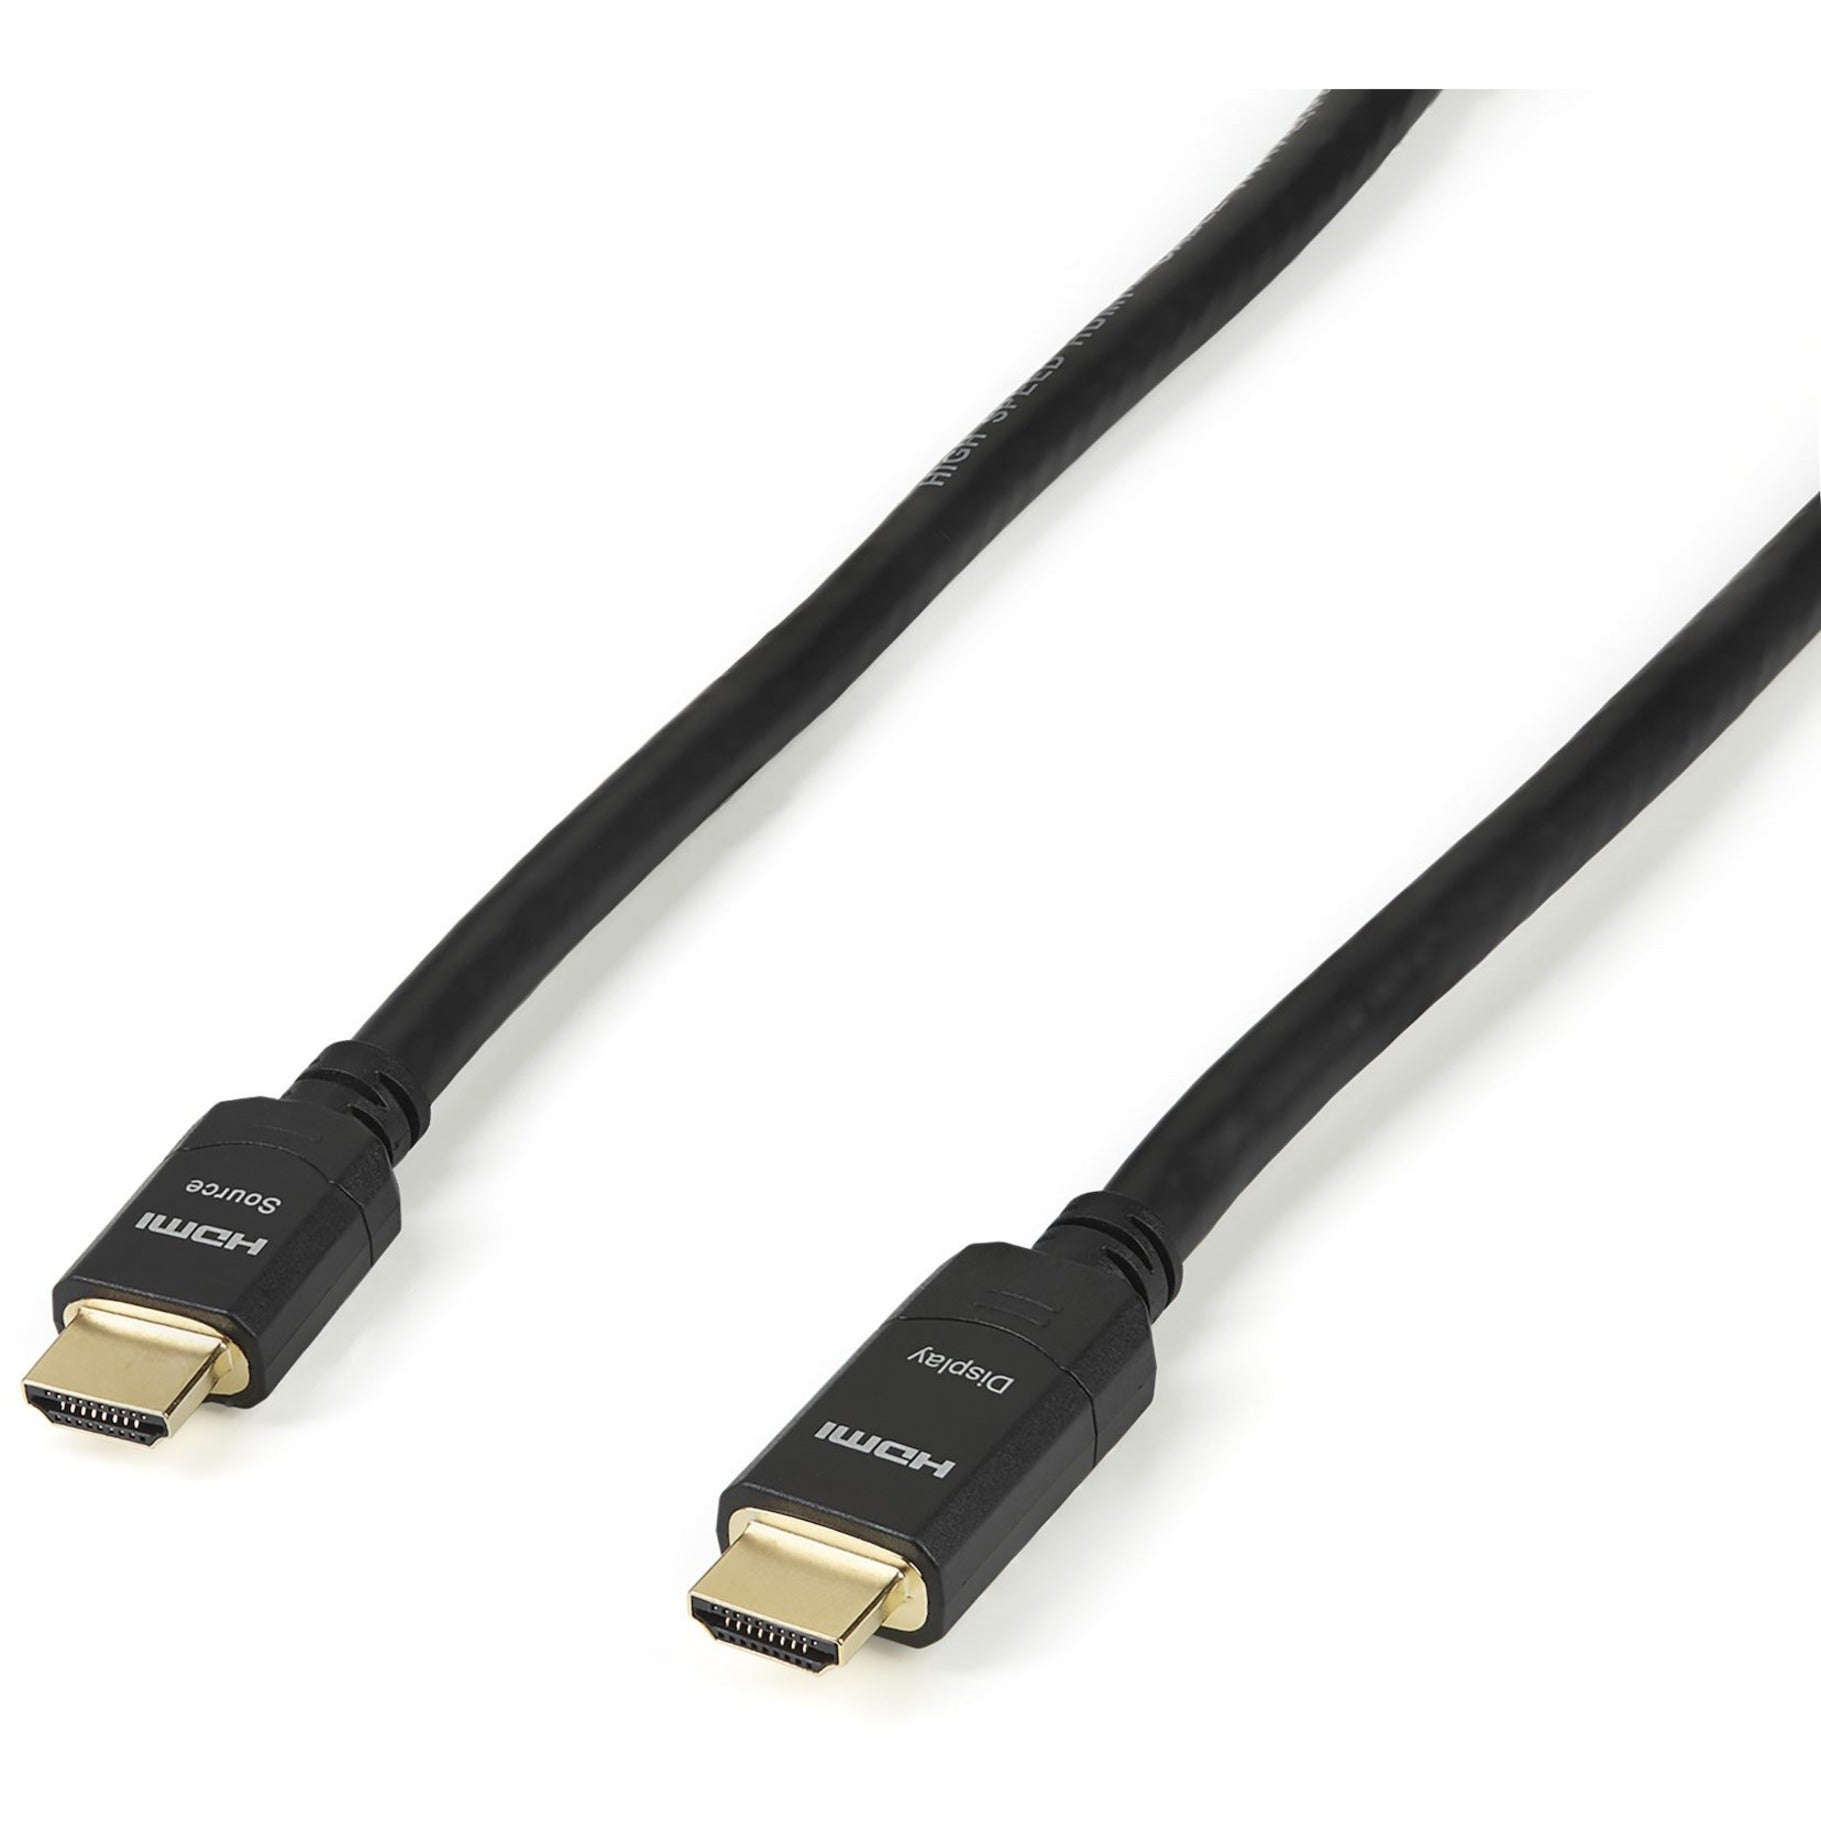 StarTech.com HDMIMM80AC 80 ft Active High Speed HDMI to HDMI Digital Video Cable, Signal Booster, Gold Plated Connectors